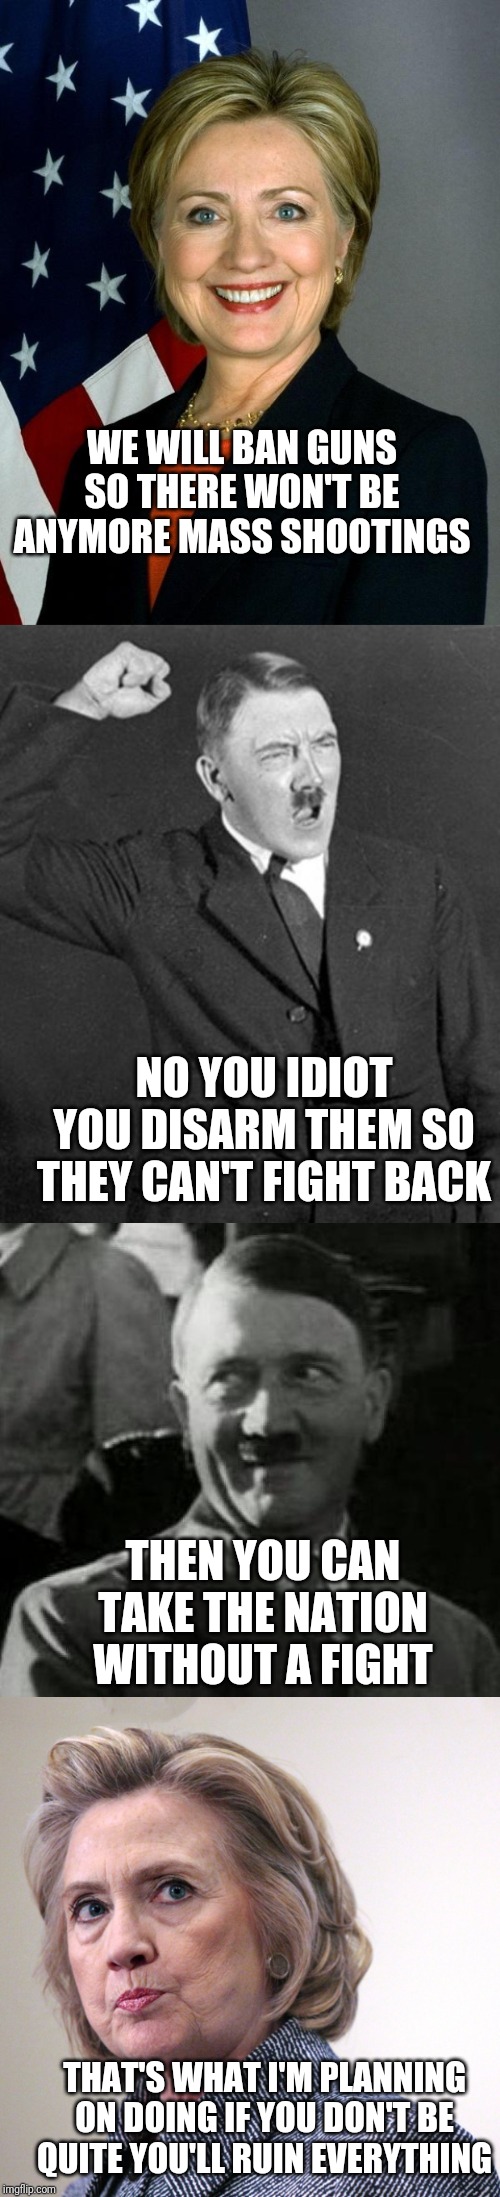 WE WILL BAN GUNS SO THERE WON'T BE ANYMORE MASS SHOOTINGS; NO YOU IDIOT YOU DISARM THEM SO THEY CAN'T FIGHT BACK; THEN YOU CAN TAKE THE NATION WITHOUT A FIGHT; THAT'S WHAT I'M PLANNING ON DOING IF YOU DON'T BE QUITE YOU'LL RUIN EVERYTHING | image tagged in hitler laugh,angry hitler,memes,hillary clinton,hillary clinton pissed | made w/ Imgflip meme maker